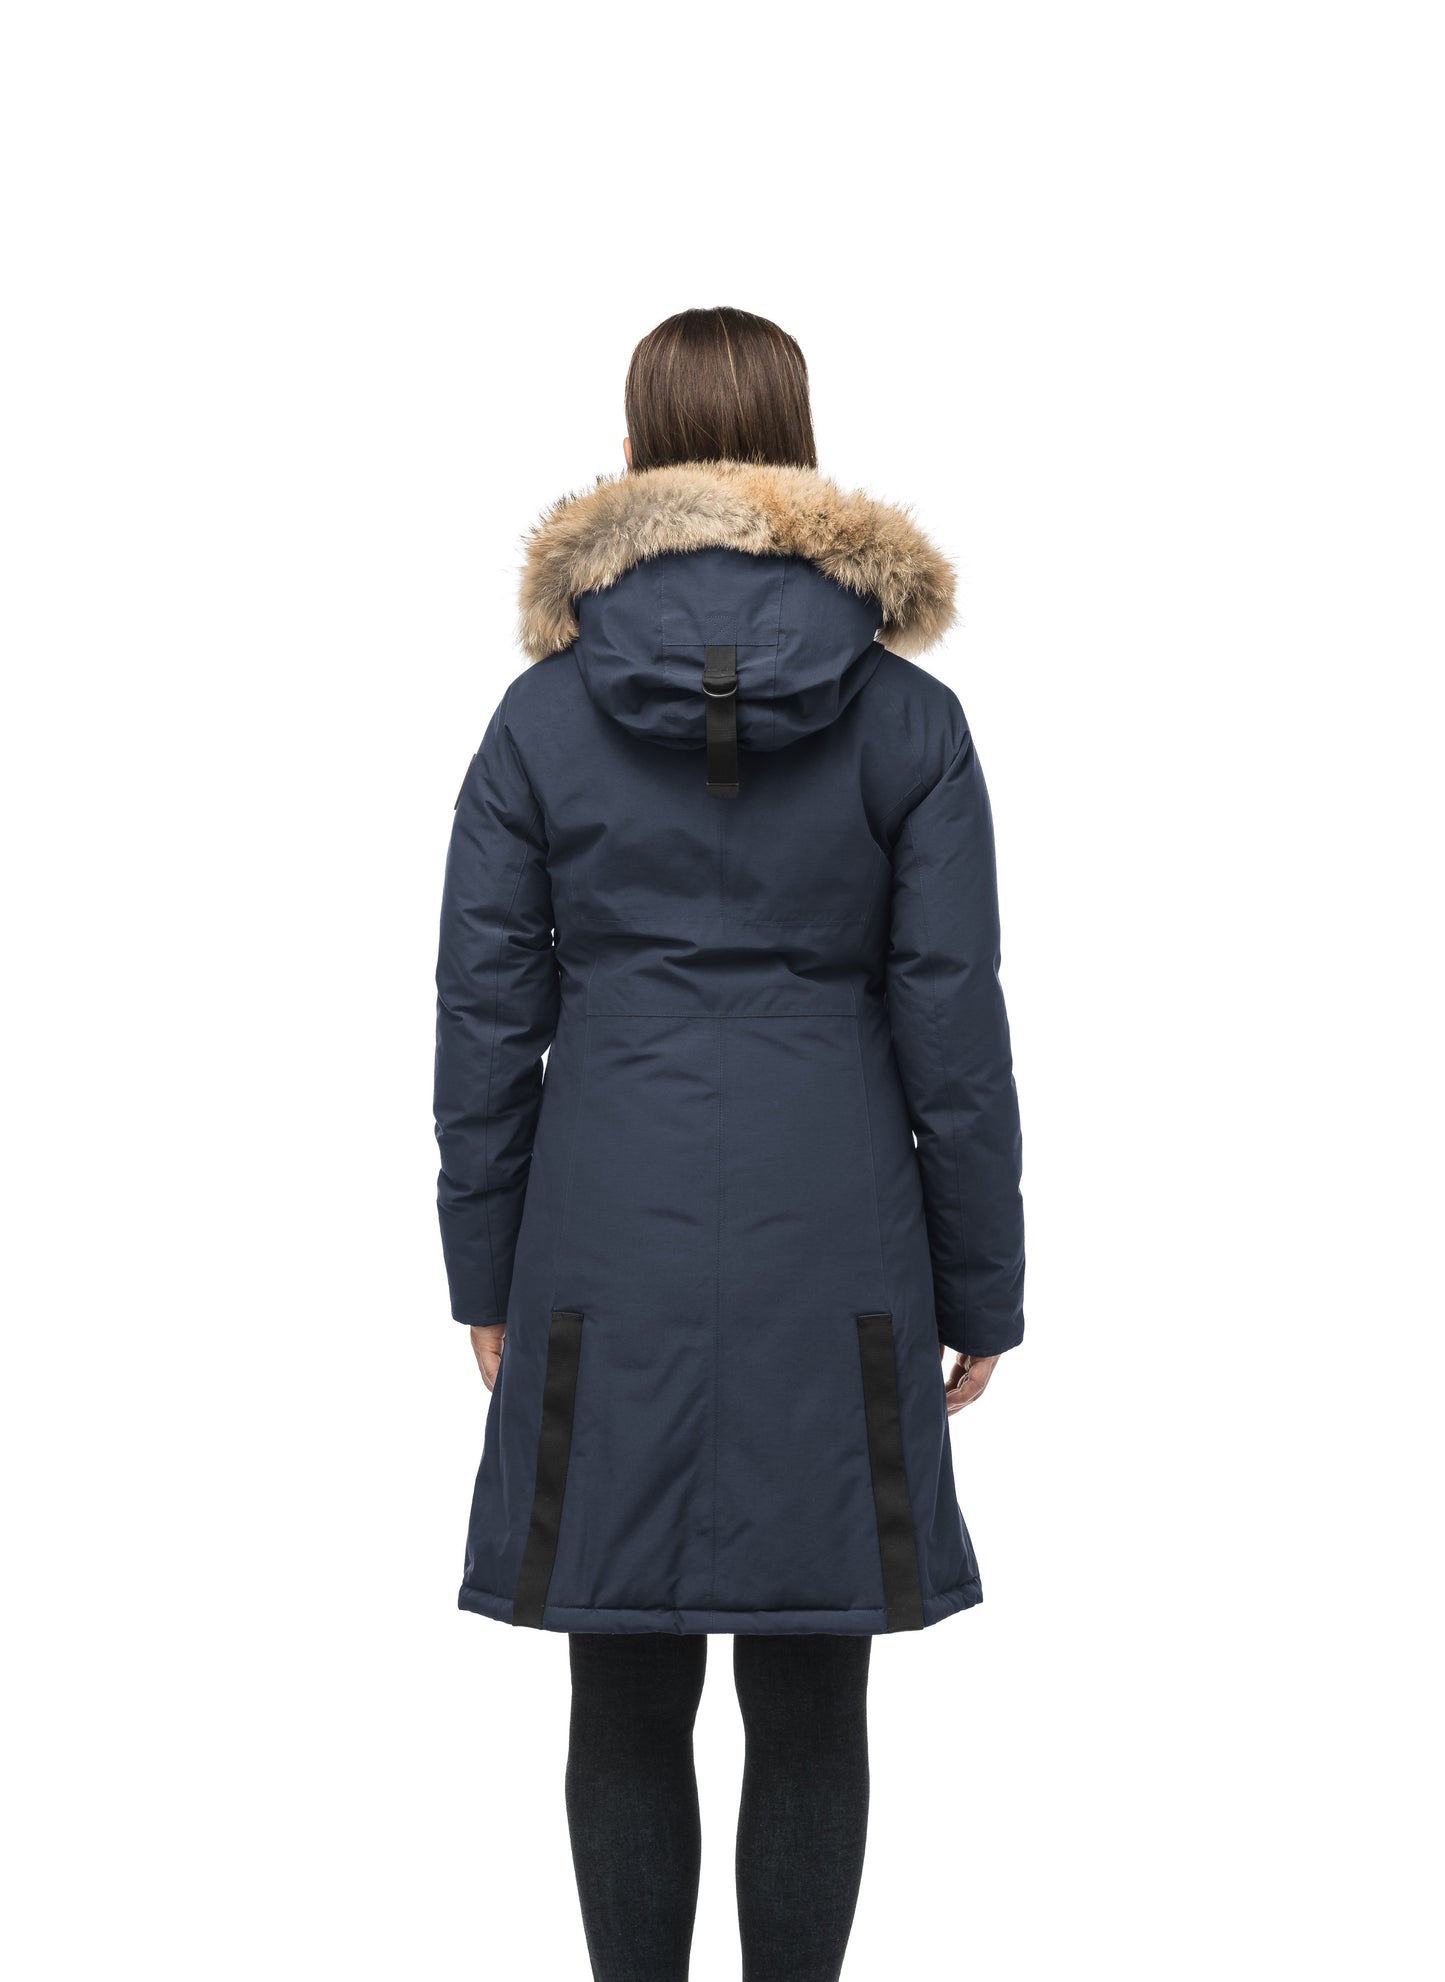 Knee length women's down filled parka with contrast ribbon accents and removable fur trim on the hood in Navy